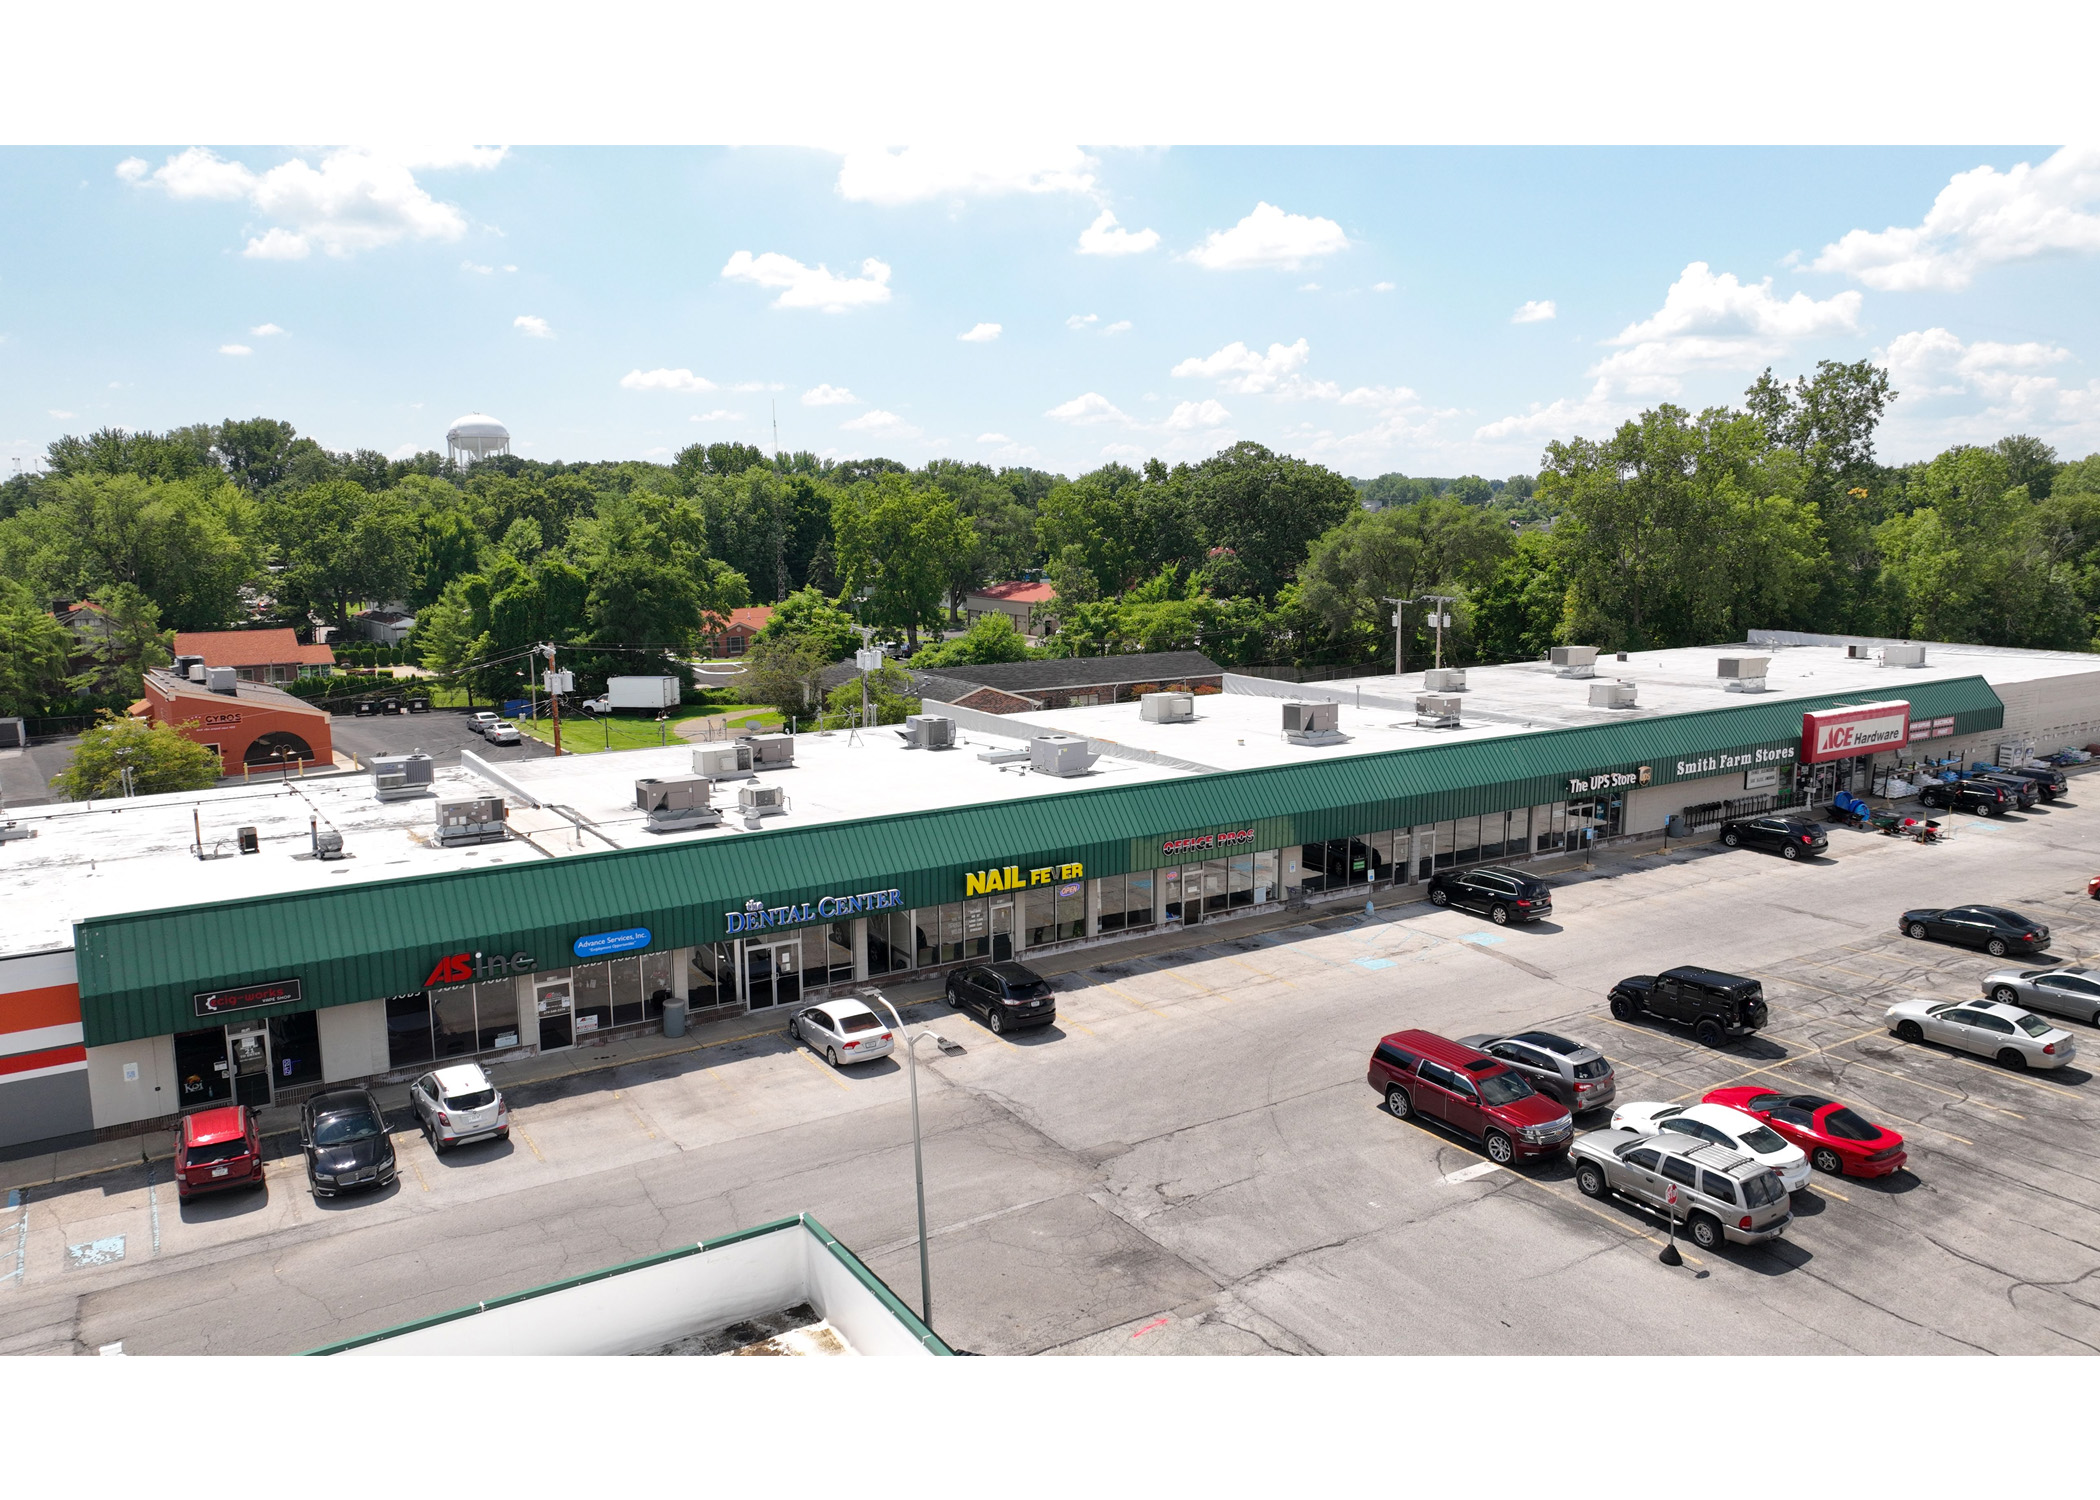 Plymouth Plaza eCig-Works, ASinc, Advance Services, The Dental Center, Nail Fever, Office Pros, The UPS Store, Smith Farm Stores, Ace Hardware parking lot aerial view.